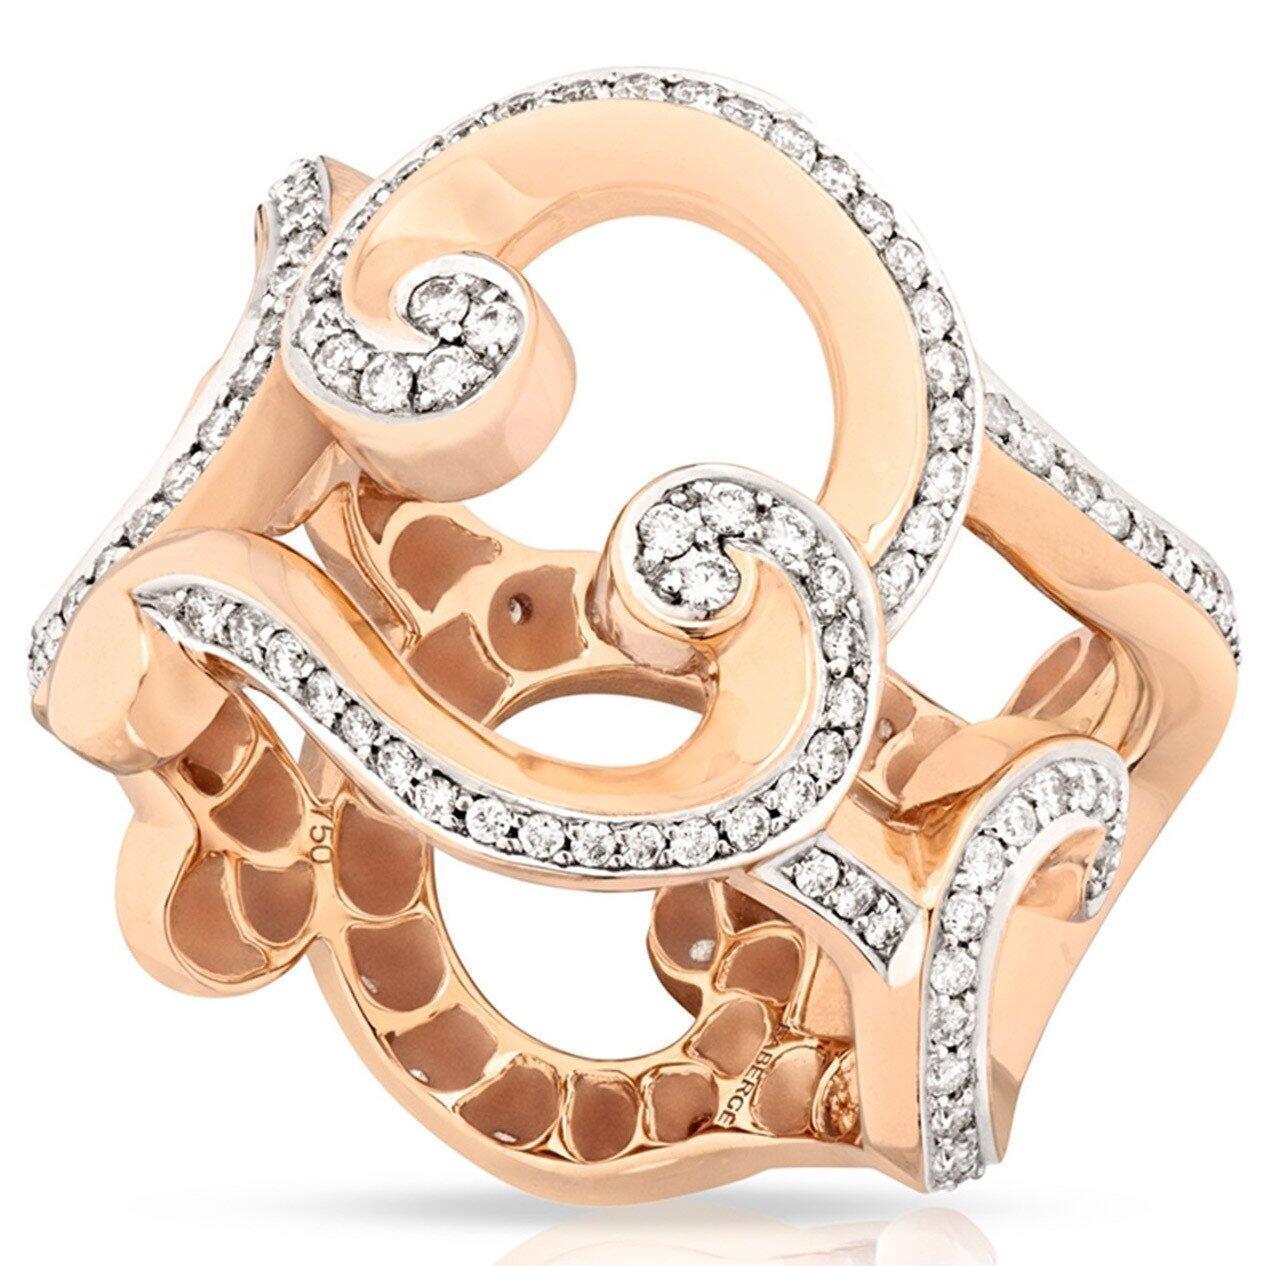 Faberge Rococo 18ct Rose Gold Pave Diamond Wide Ring - Default / Rose Gold